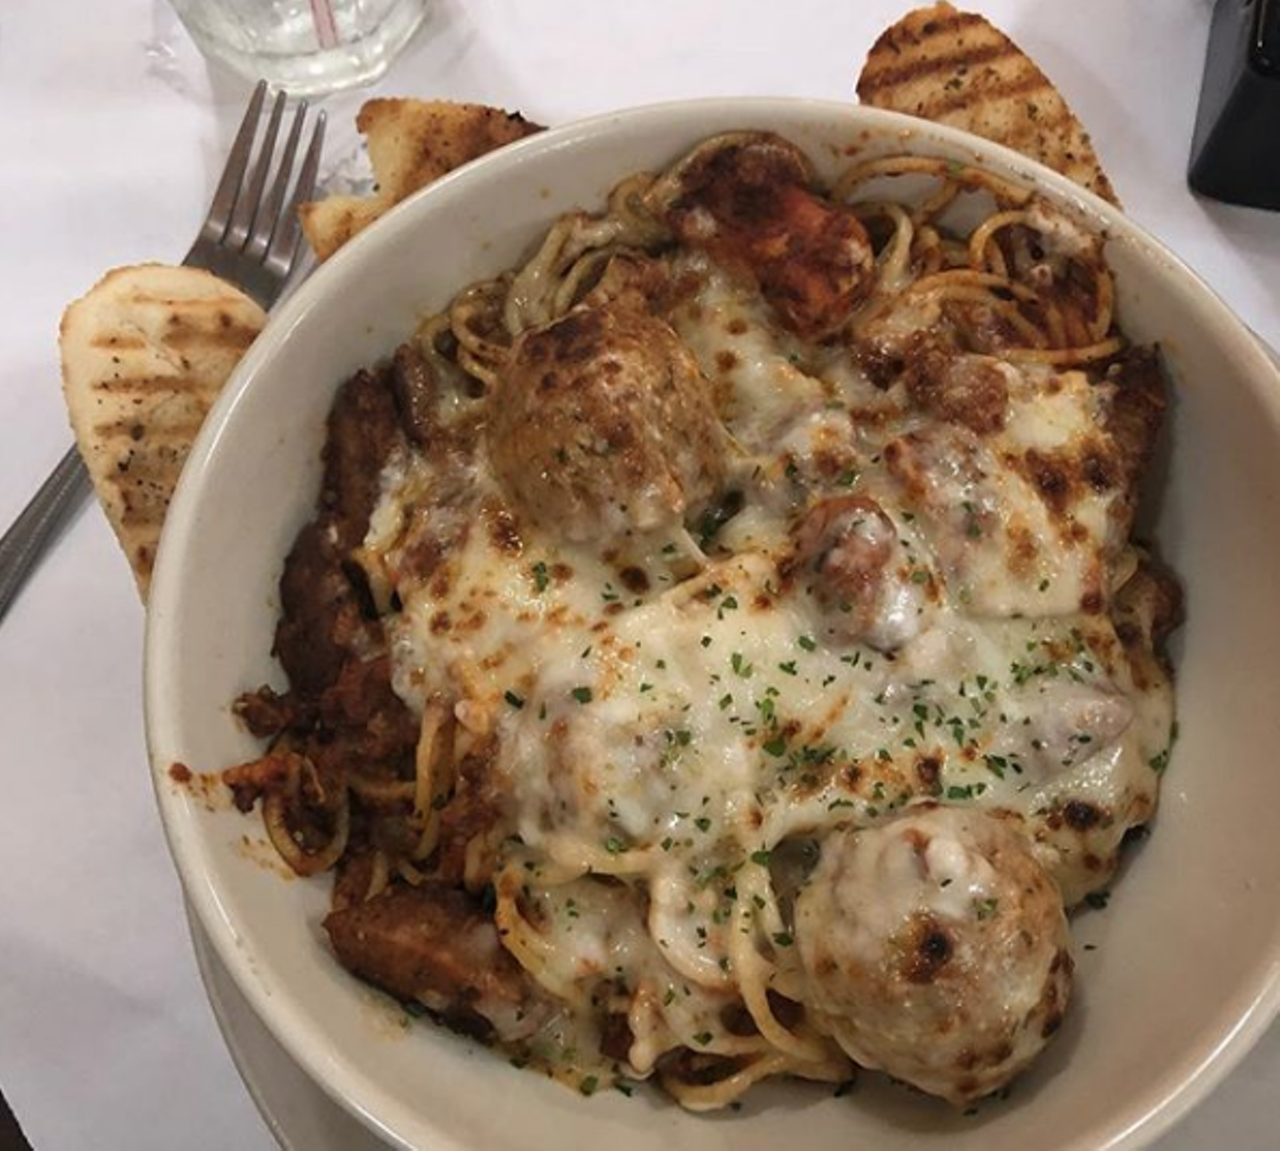 Zio’s Italian Kitchen
Multiple locations, zios.com
Get on that email list so you can enjoy a free entree. Though it has to be priced at $12 or less, we’re sure you’ll still have a dope celebratory meal.
Photo via Instagram / food.adventures.worldwide